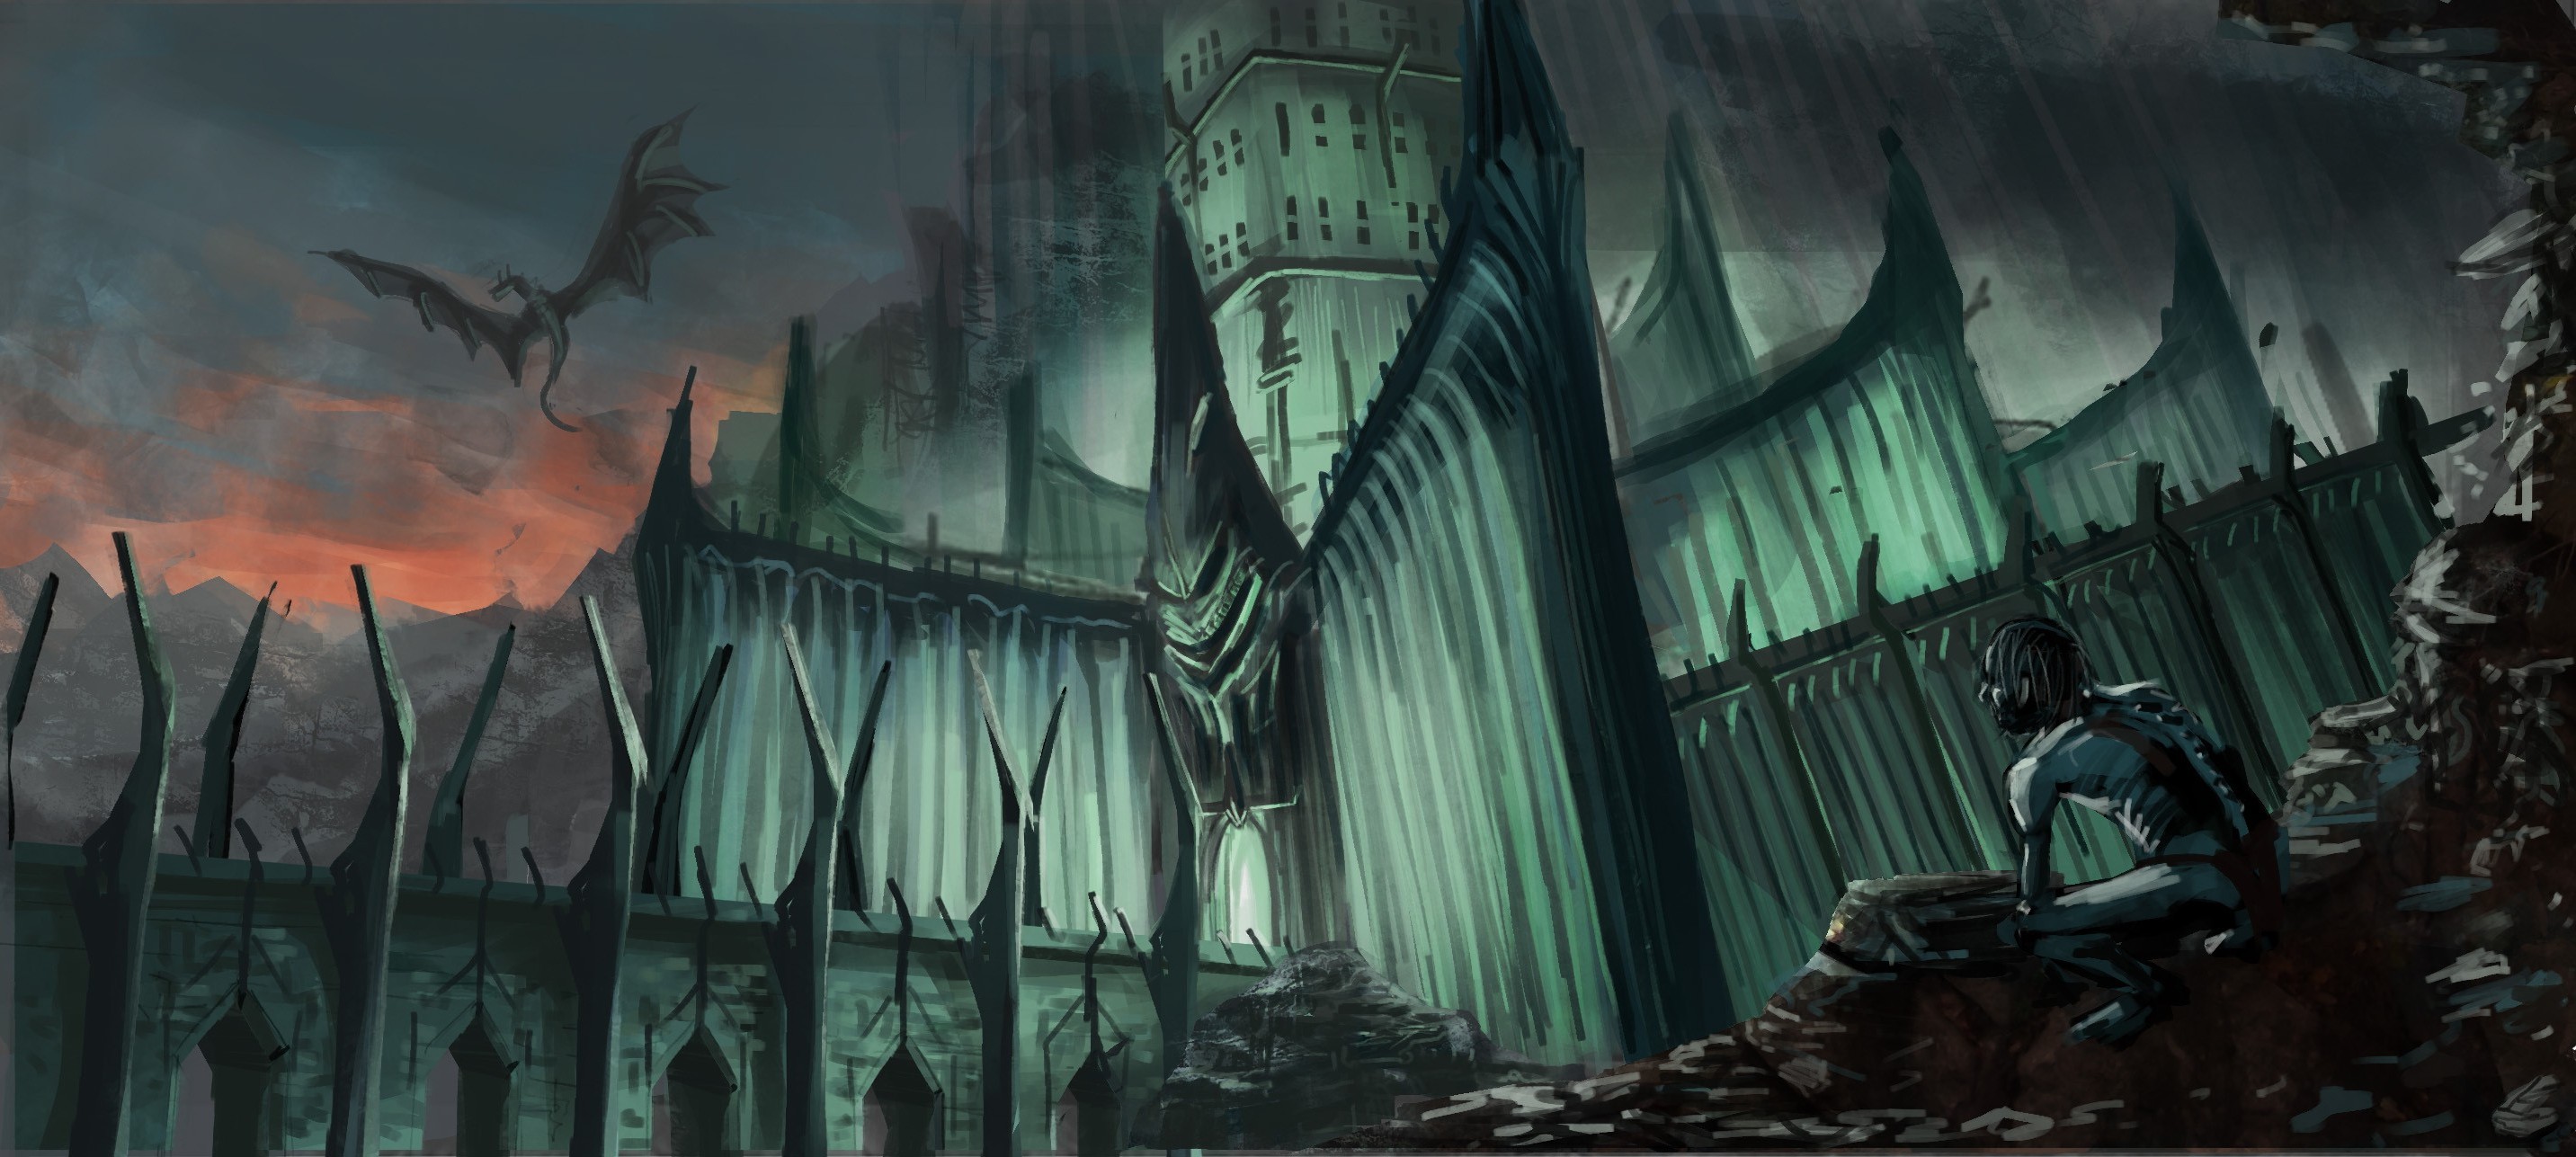 Gollum, Smeagol, Minas Morgul, Middle earth: Mordor, Nazgûl, The Lord Of The Rings Wallpaper